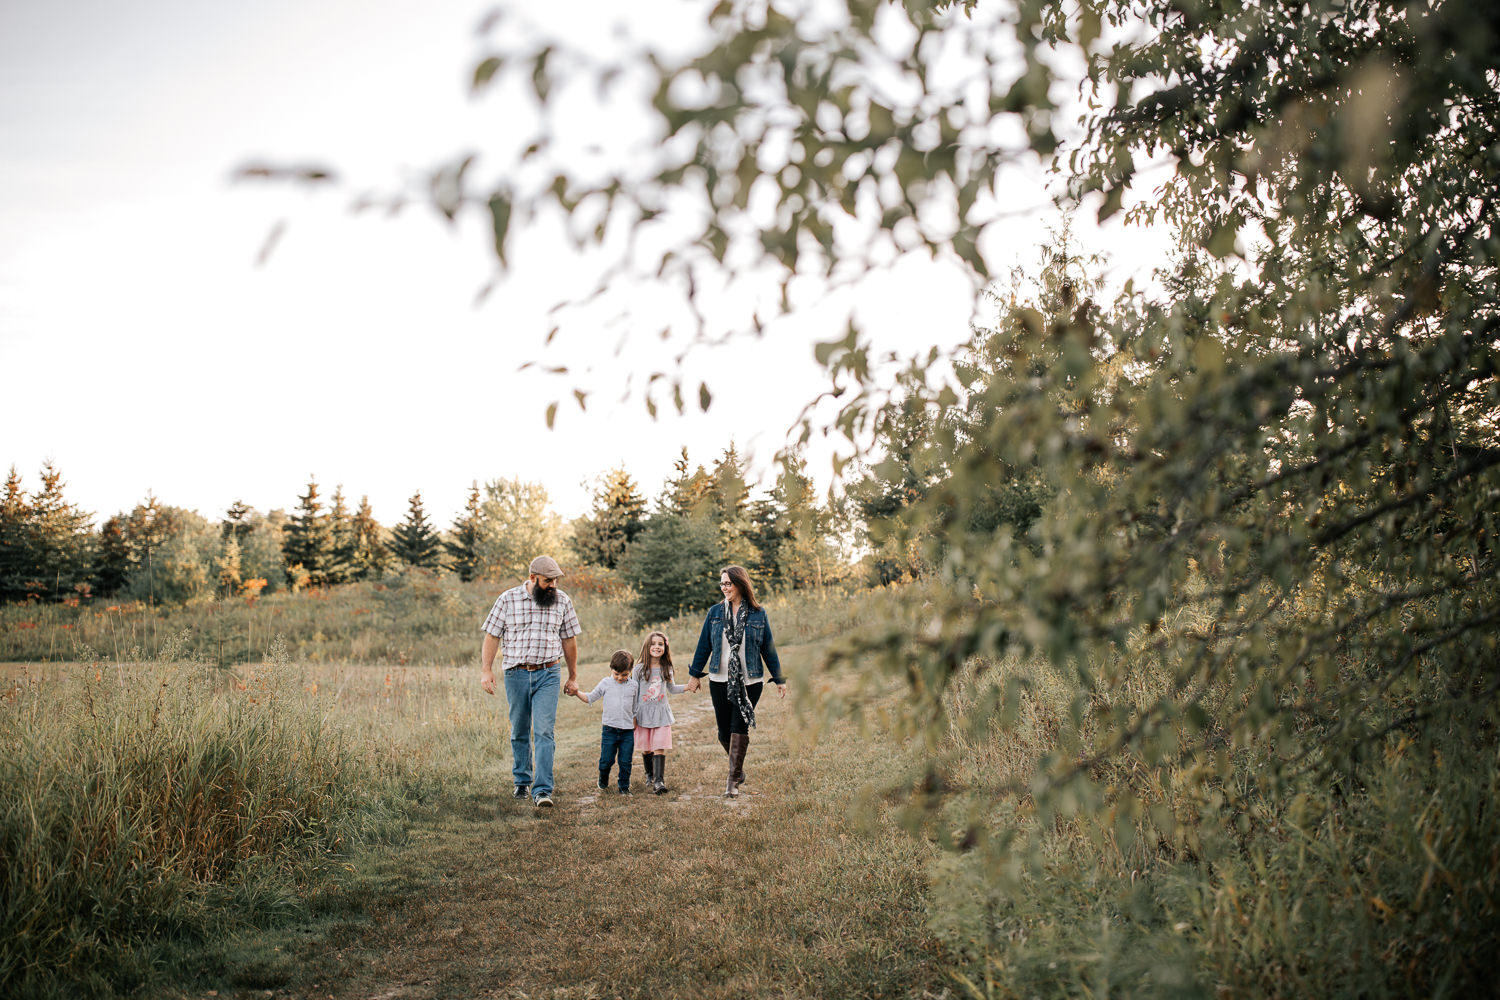 family of 4 holding hands, walking down path in grassy field, smiling at each other, trees in foreground - Barrie Lifestyle Photos